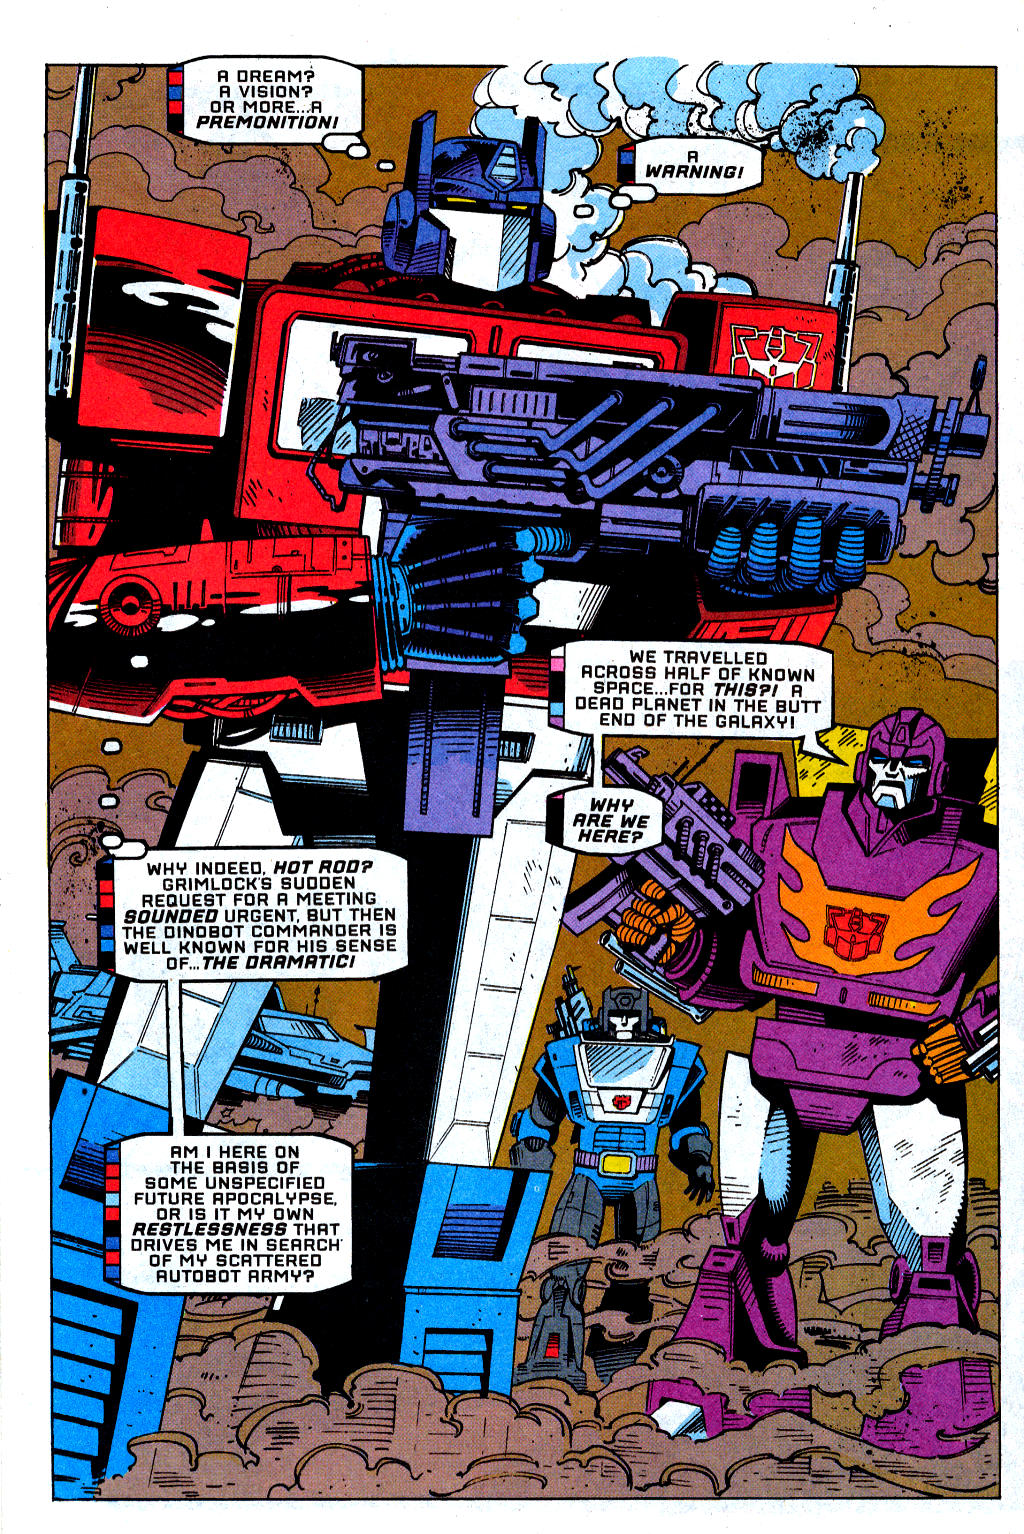 Transformers: Generation 2 Vol. 1 Issue #1 "War Without End" (1993), Marvel Comics. Words by Simon Furman. Art by Derek Yaniger, Marie Severin, and Yancey Labat.